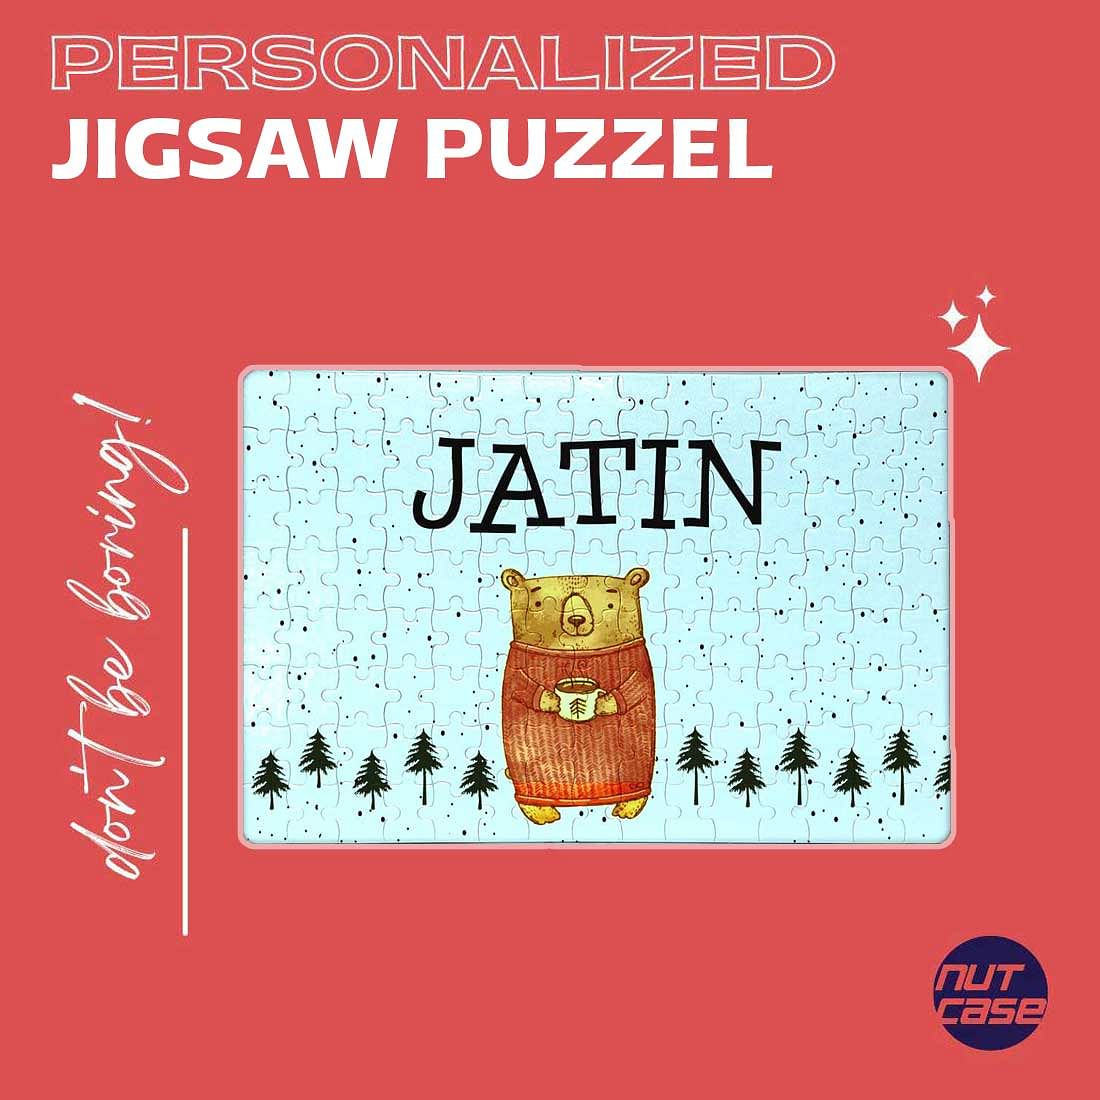 Buy Good Vibes- Personalised Jigsaw Puzzle, Gift for Parents from Kids,  Puzzles for Adults, Photo Gift Online at Low Prices in India - Amazon.in